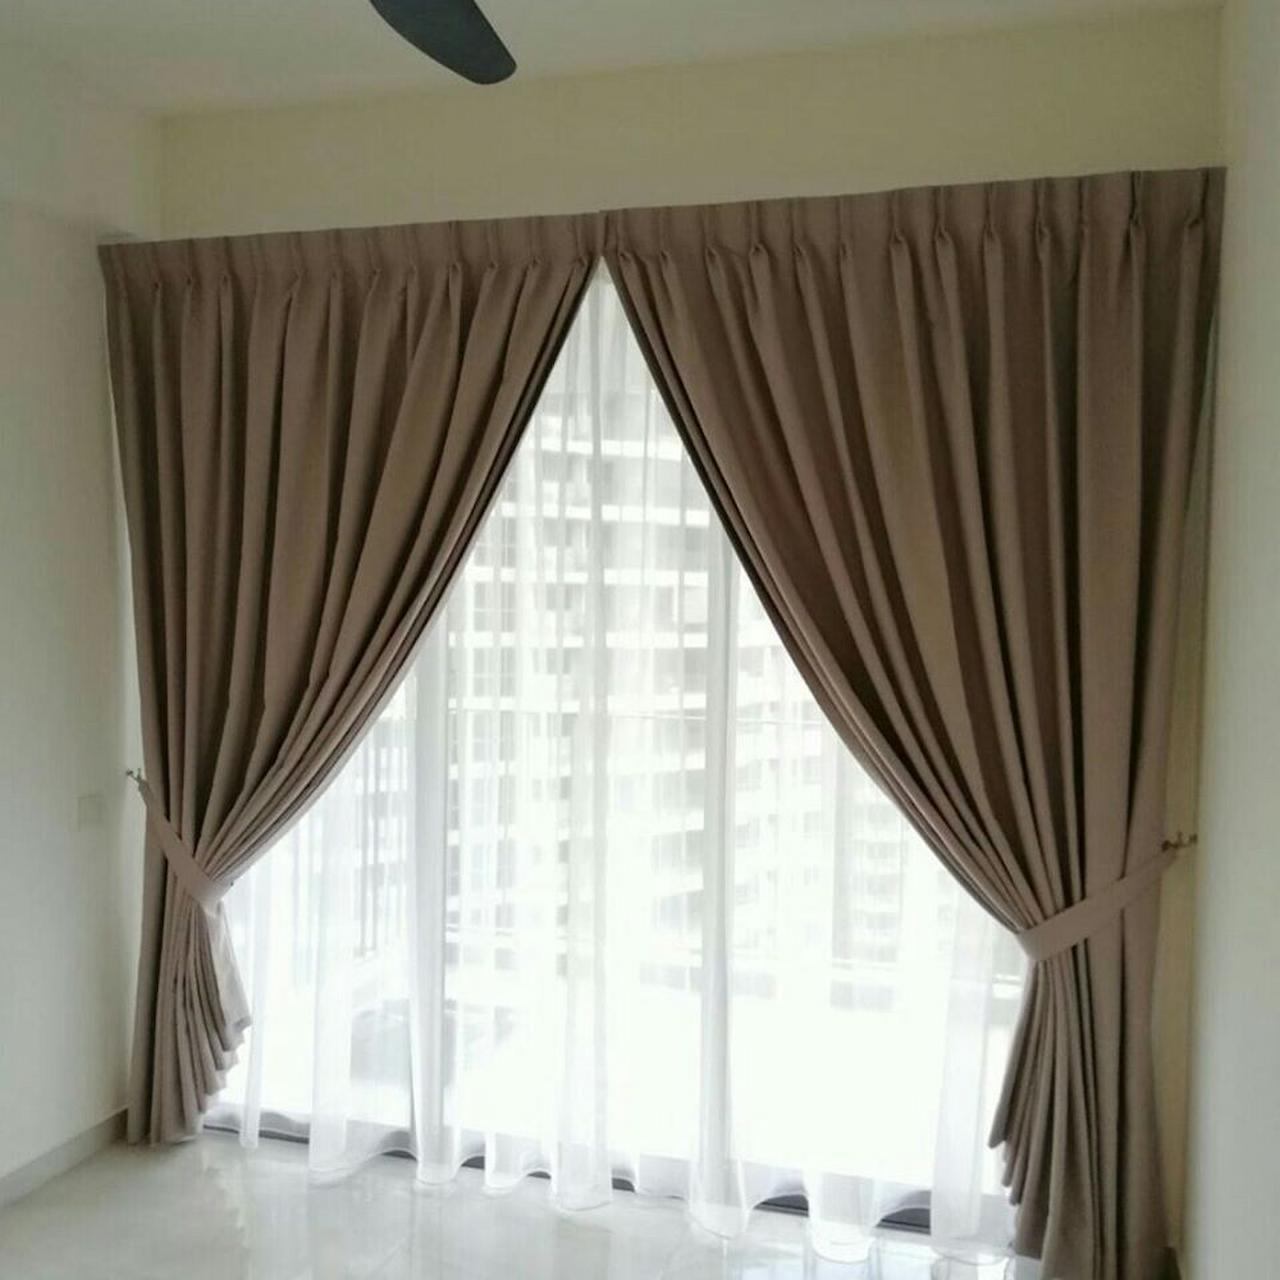 What Makes Love Is Blinds A Preferable Option For Curtain Shopping?